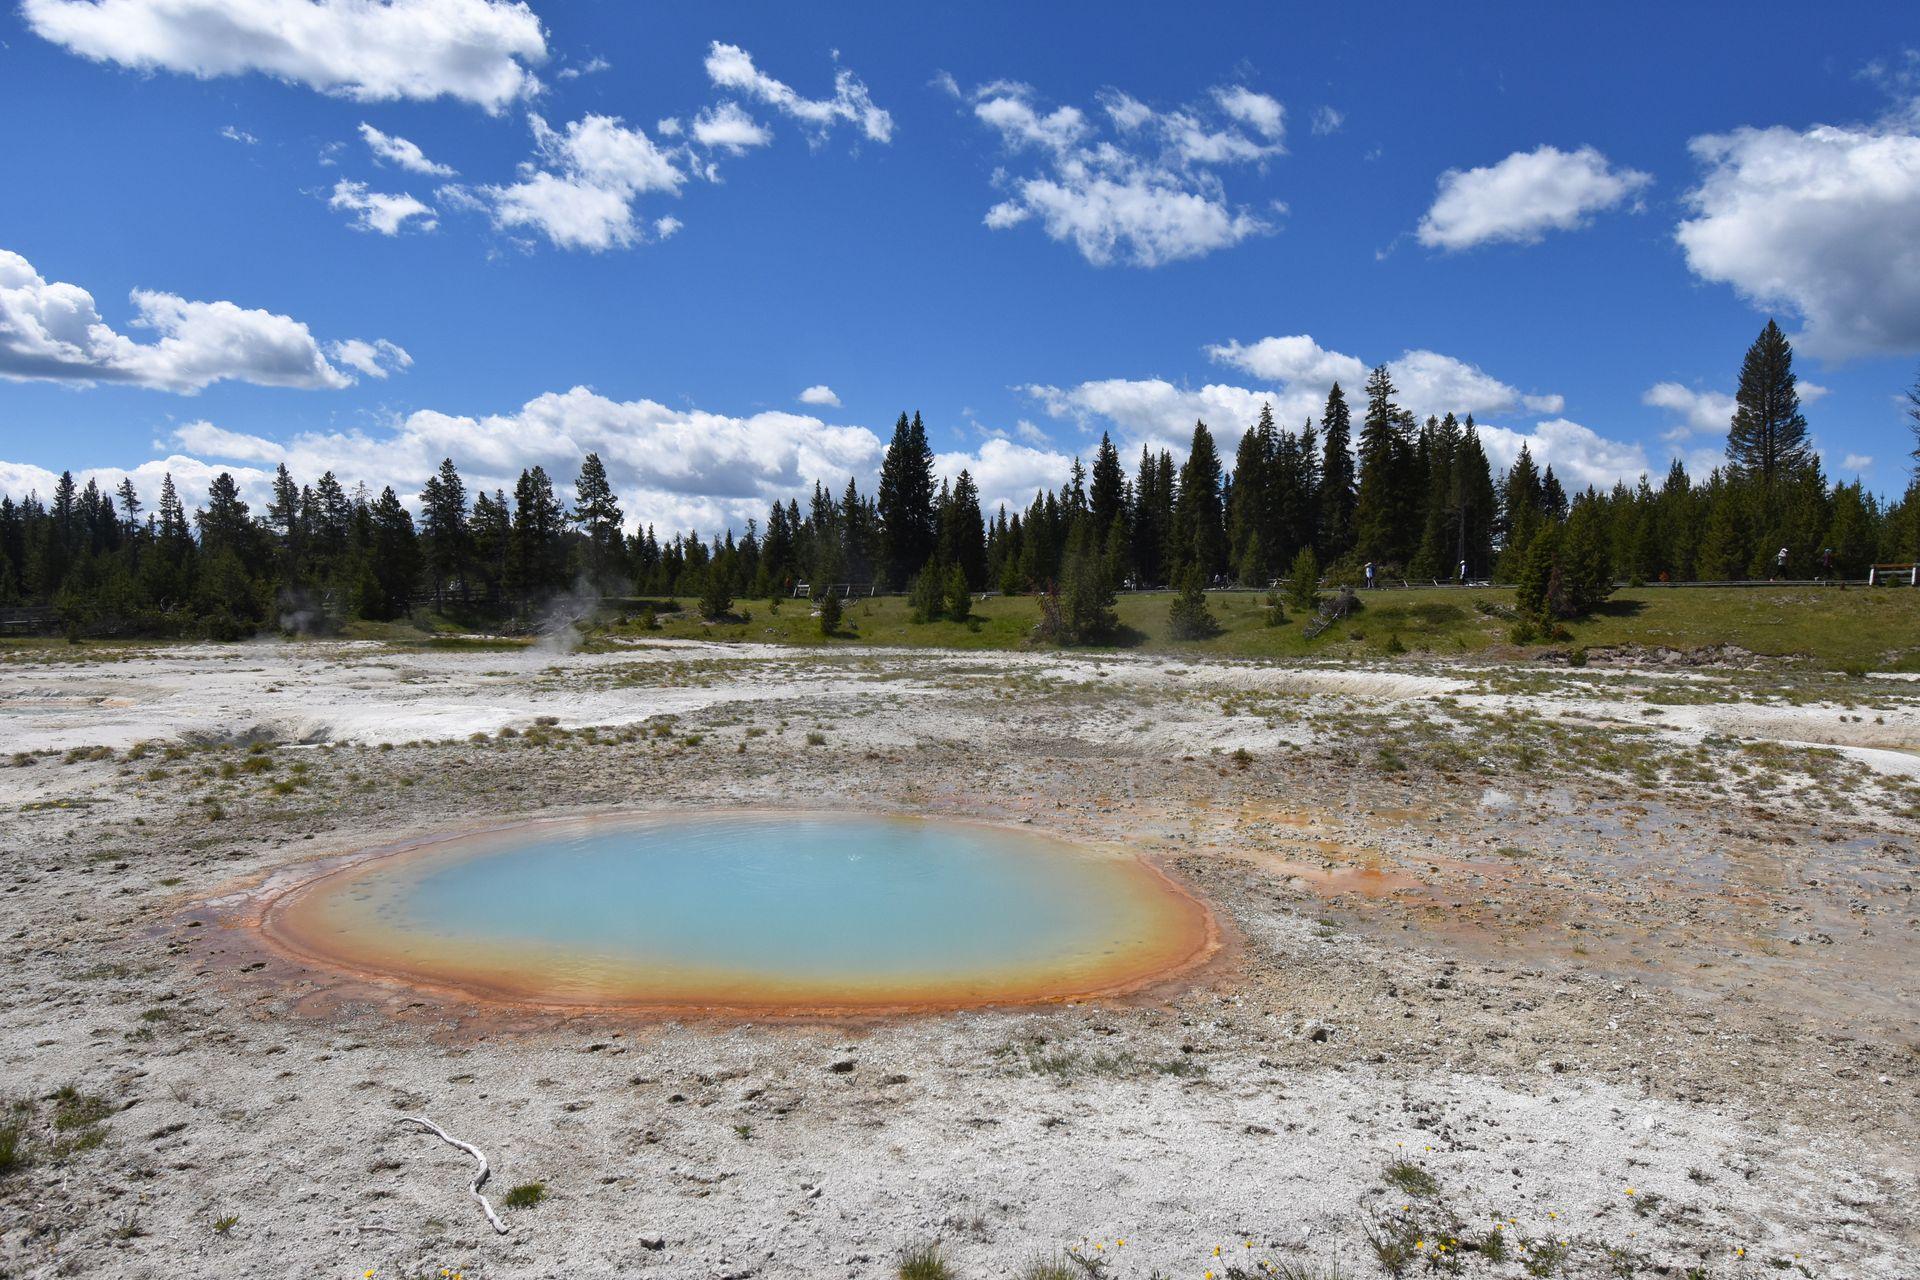 A colorful hot spring in the West Thumb area of Yellowstone.